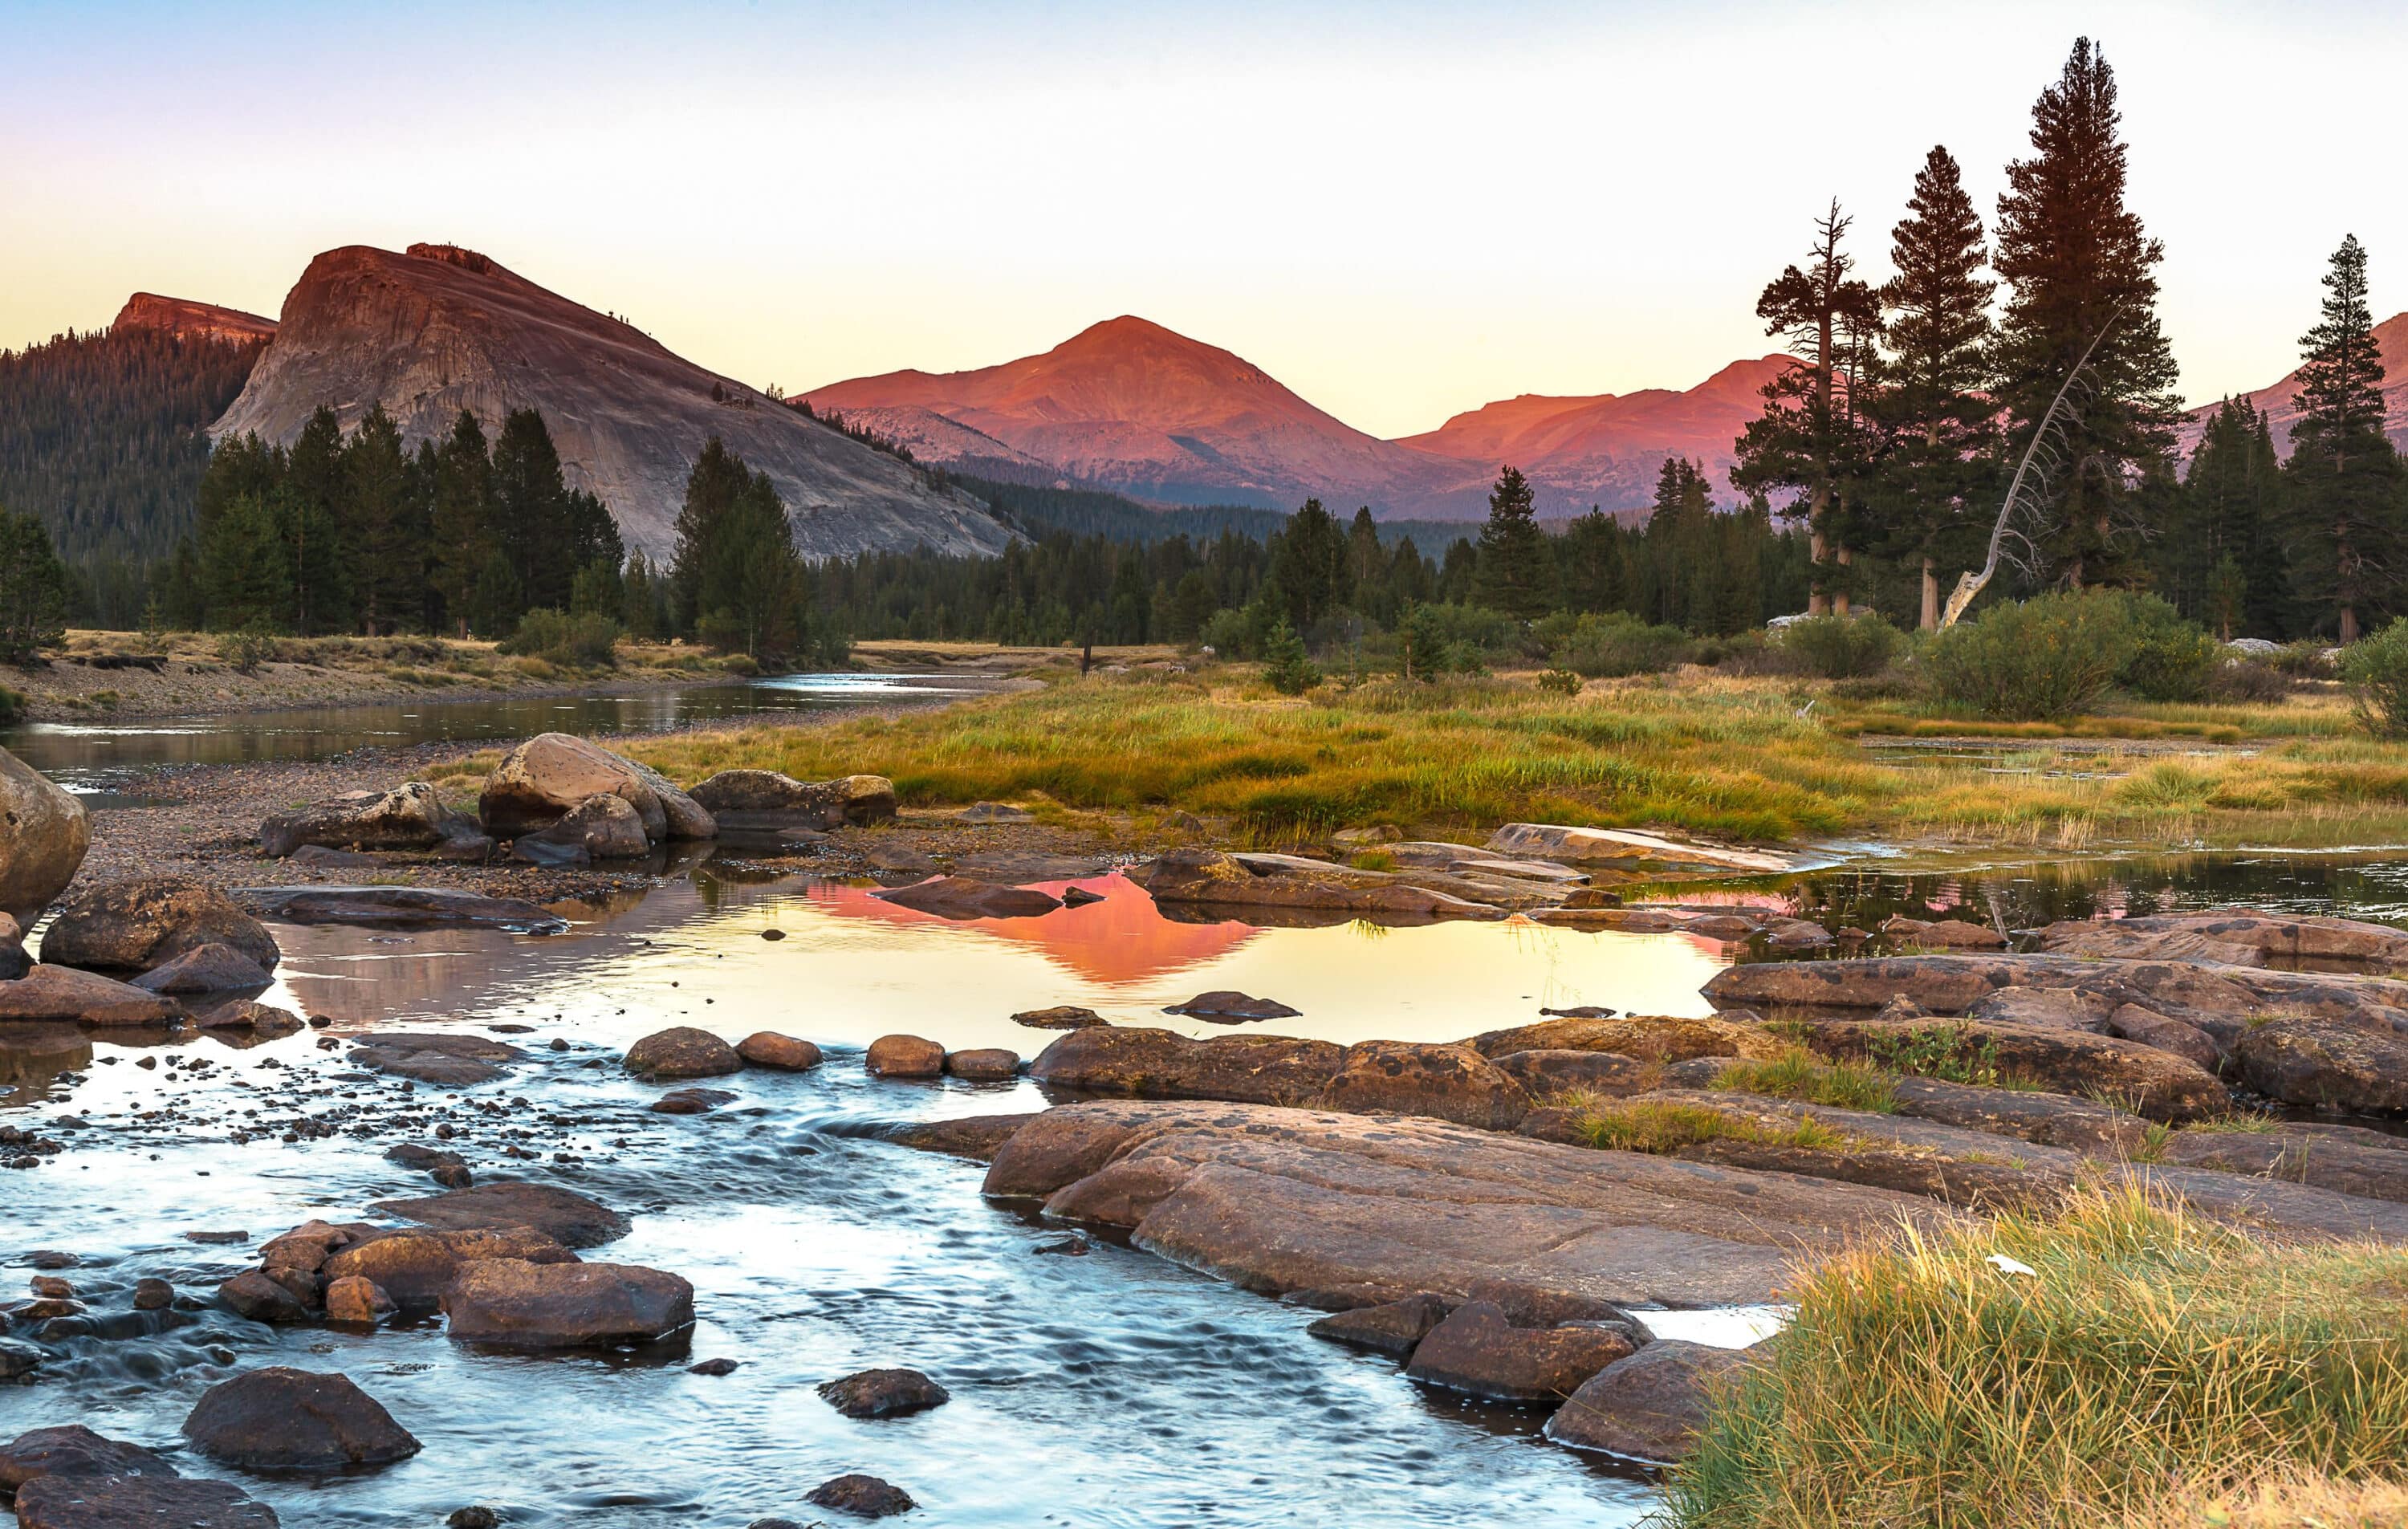 Yosemite Meadows with water in the foreground and rust-tinged mountains in the background.